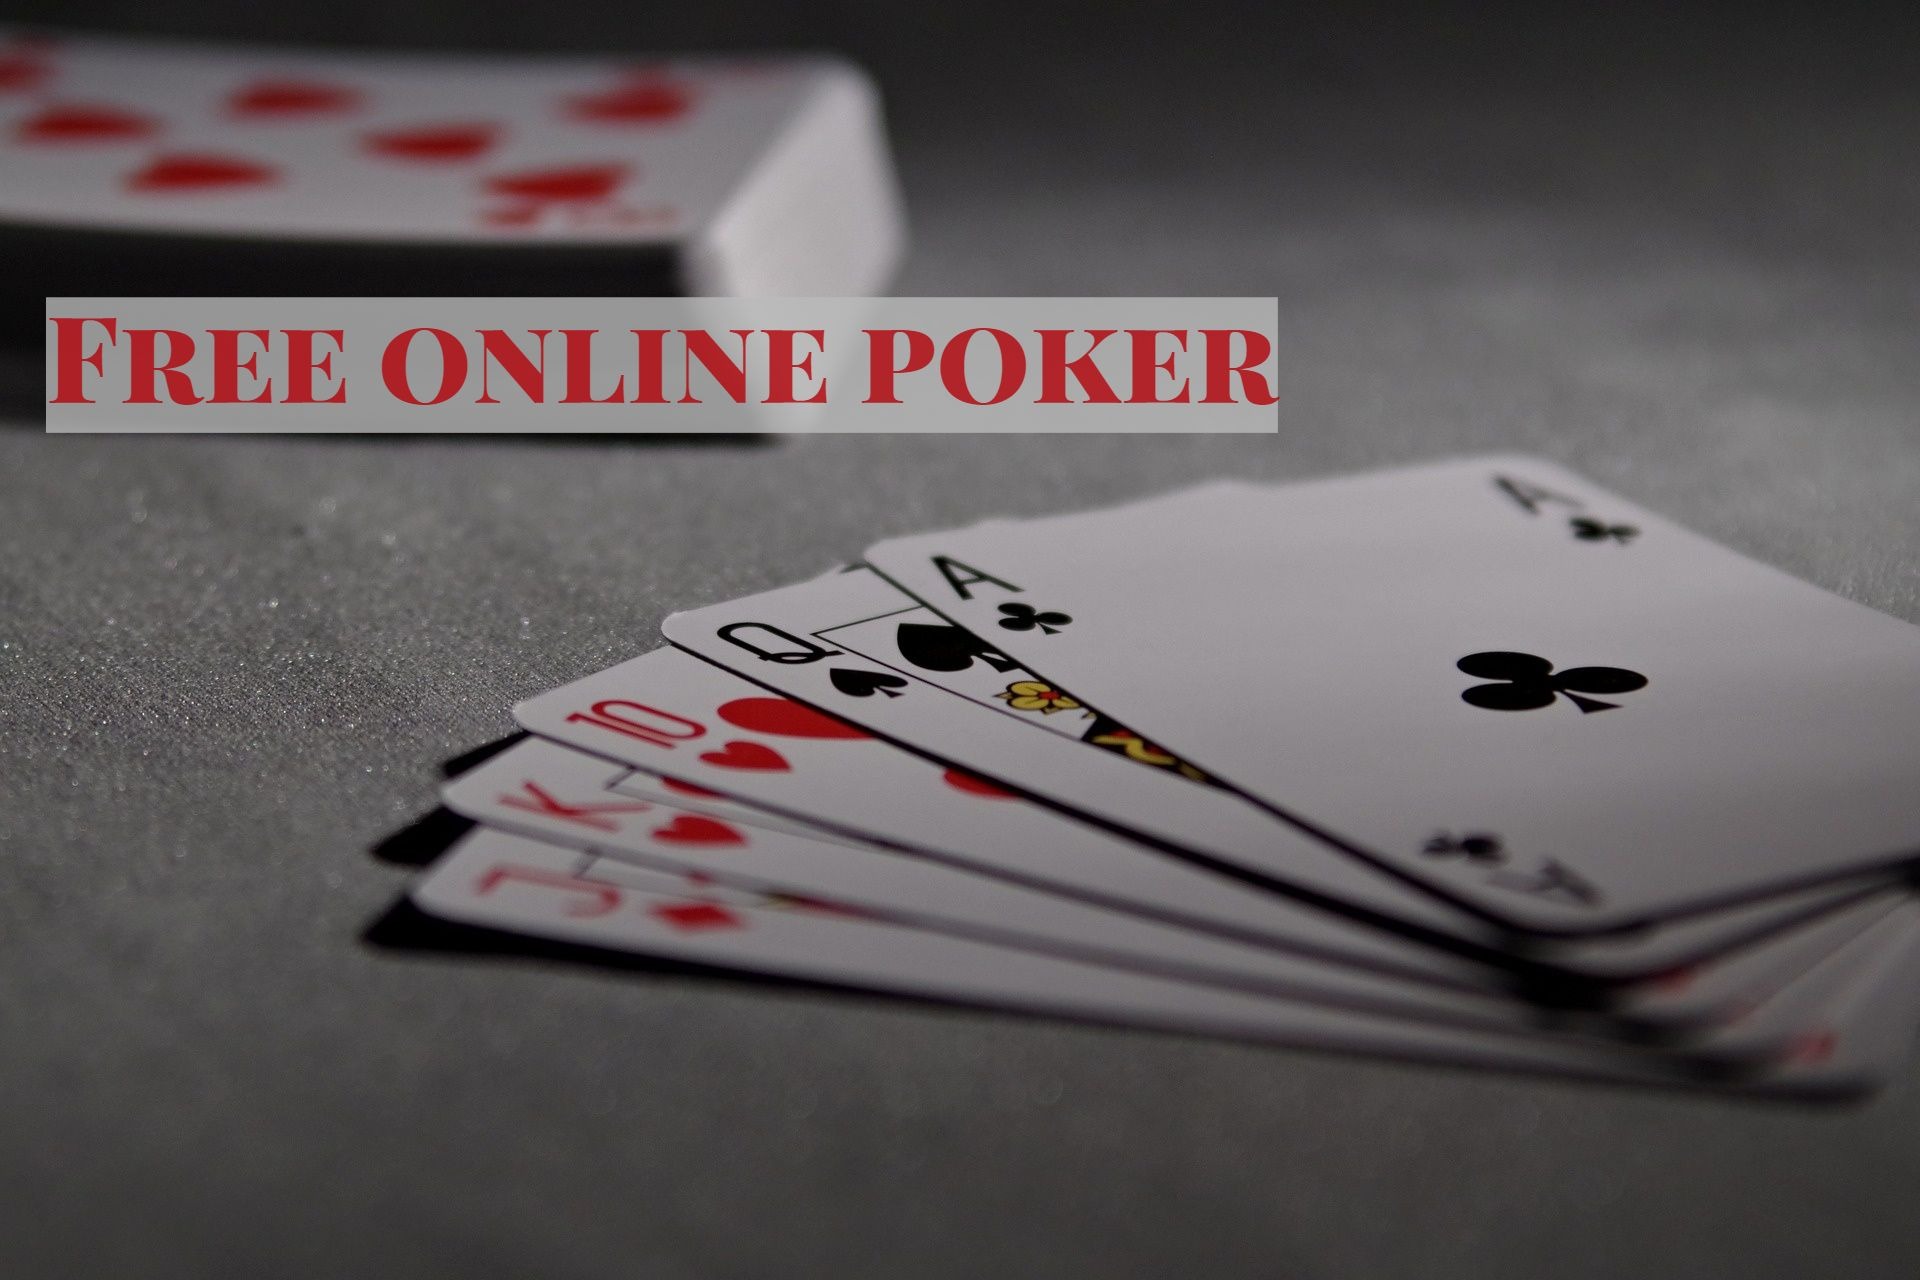 Online poker free to play now